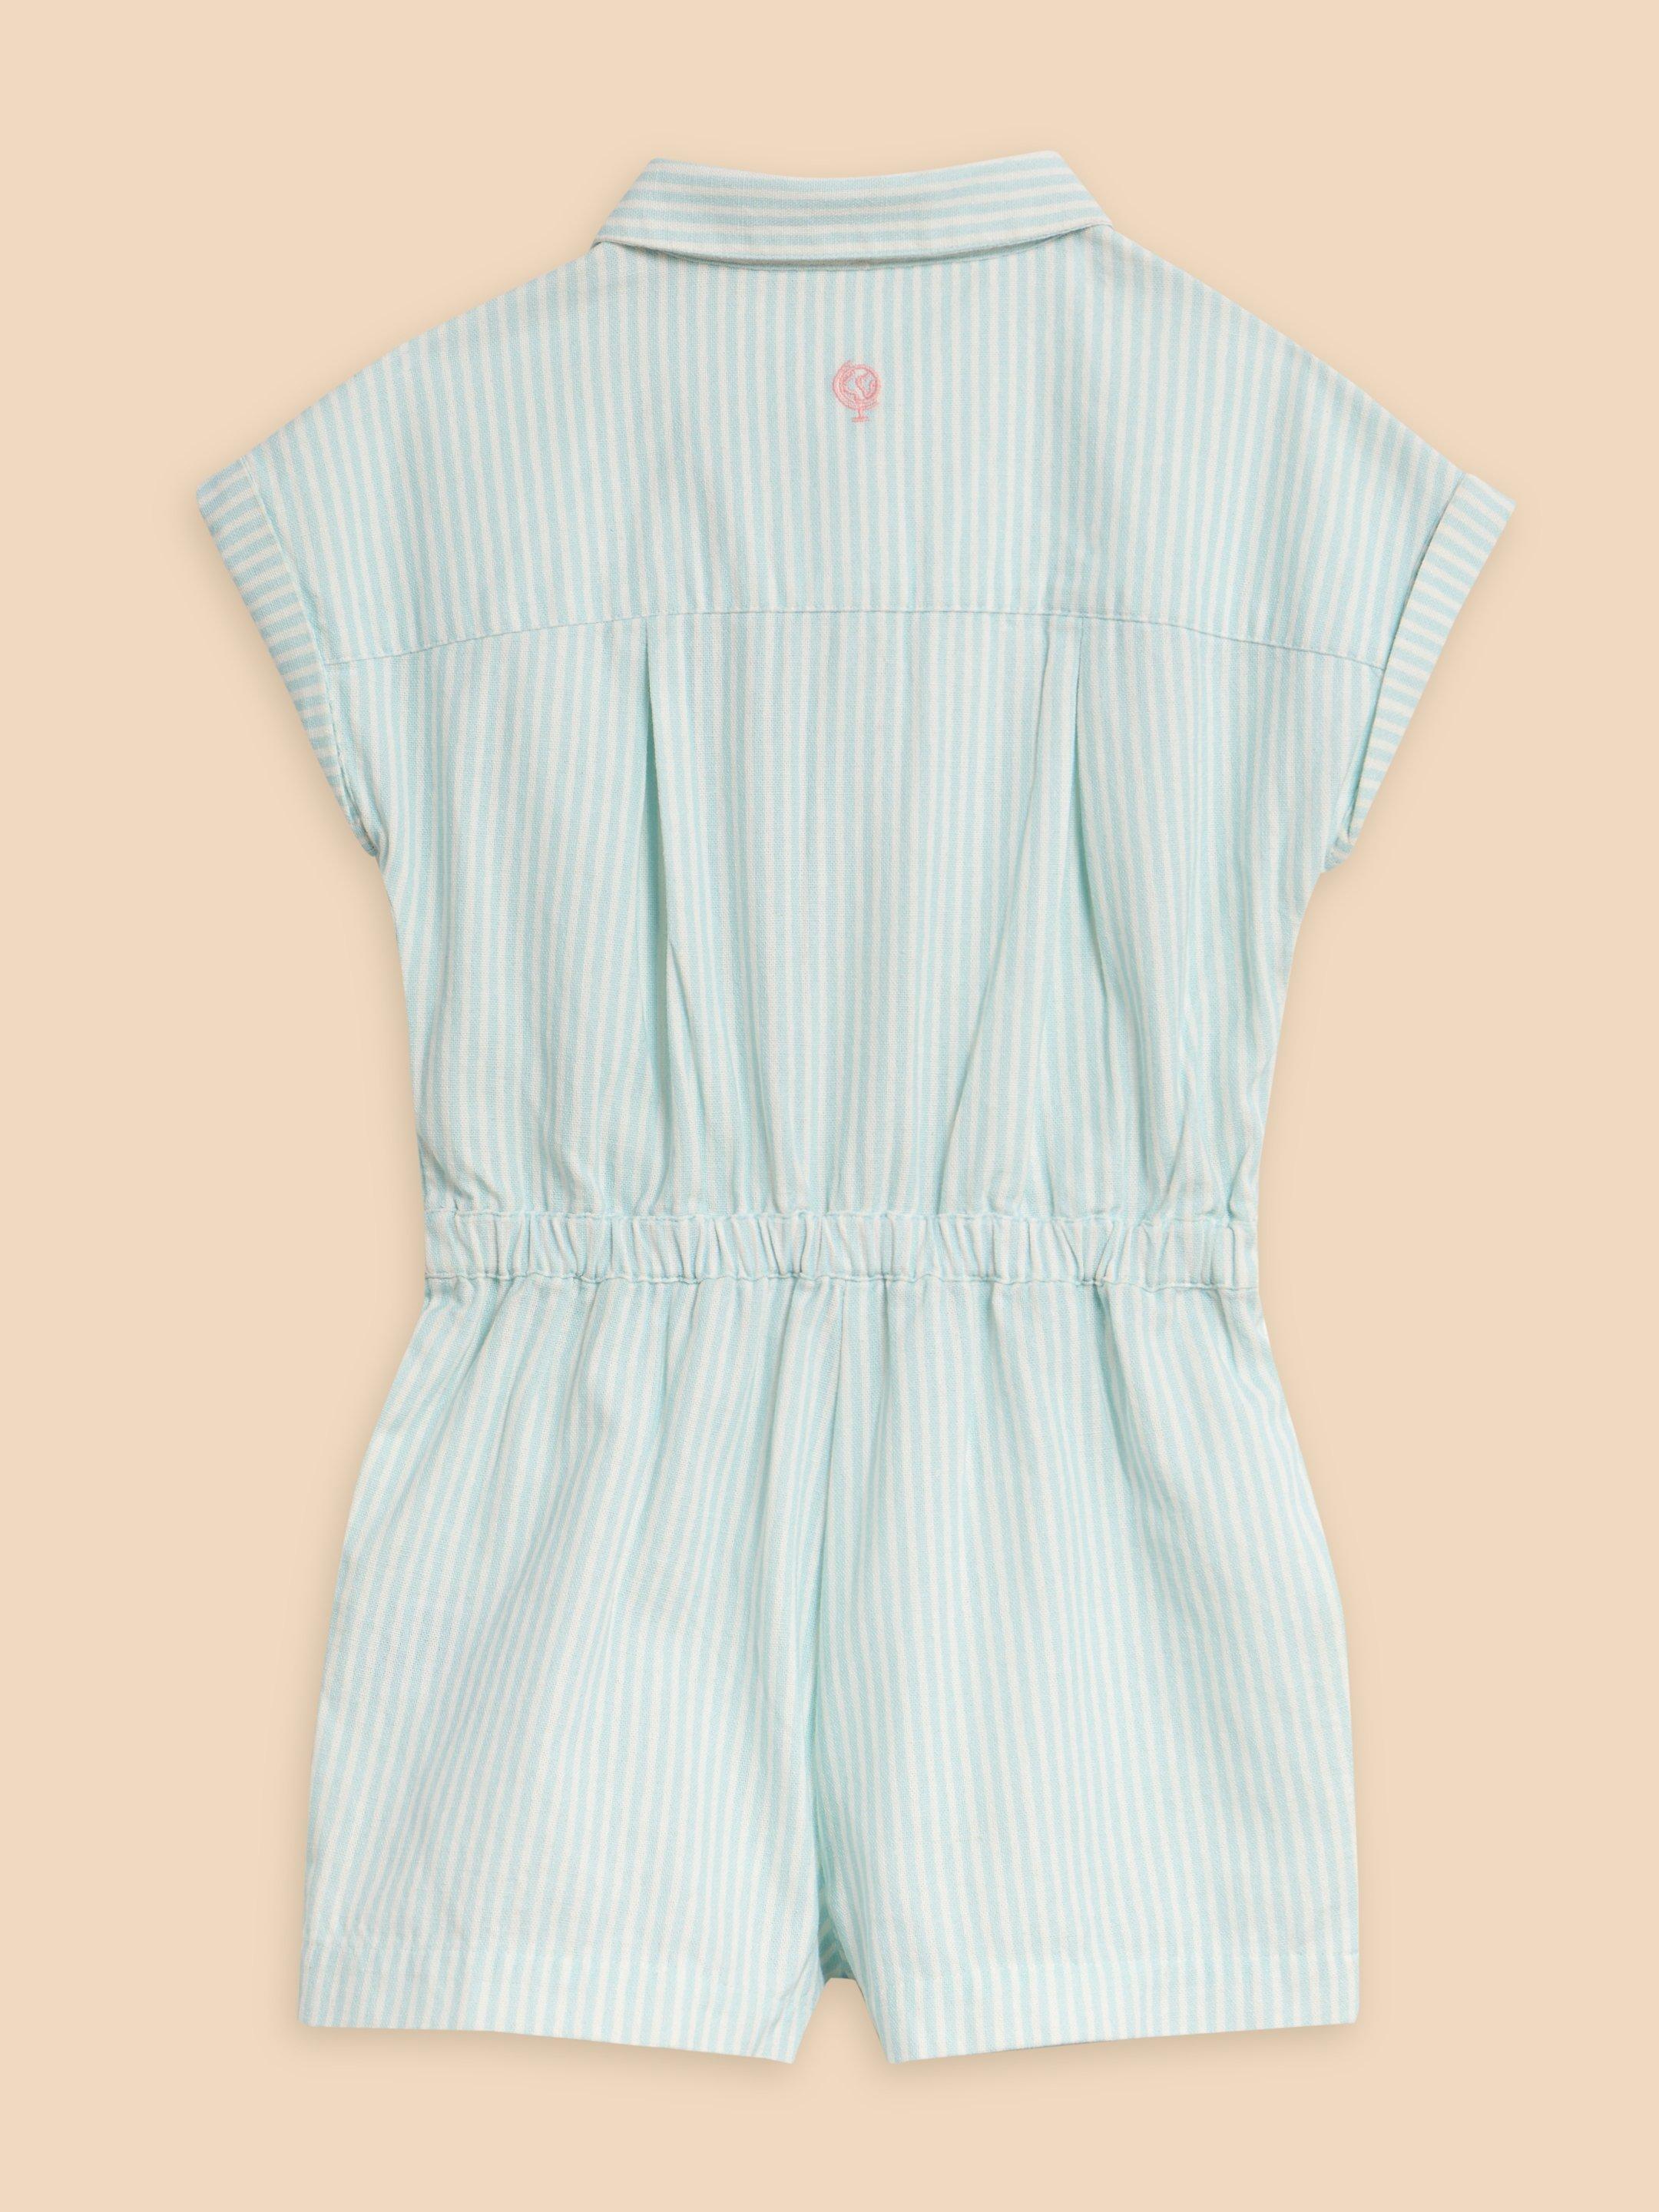 Striped Woven Playsuit in LGT BLUE - FLAT BACK